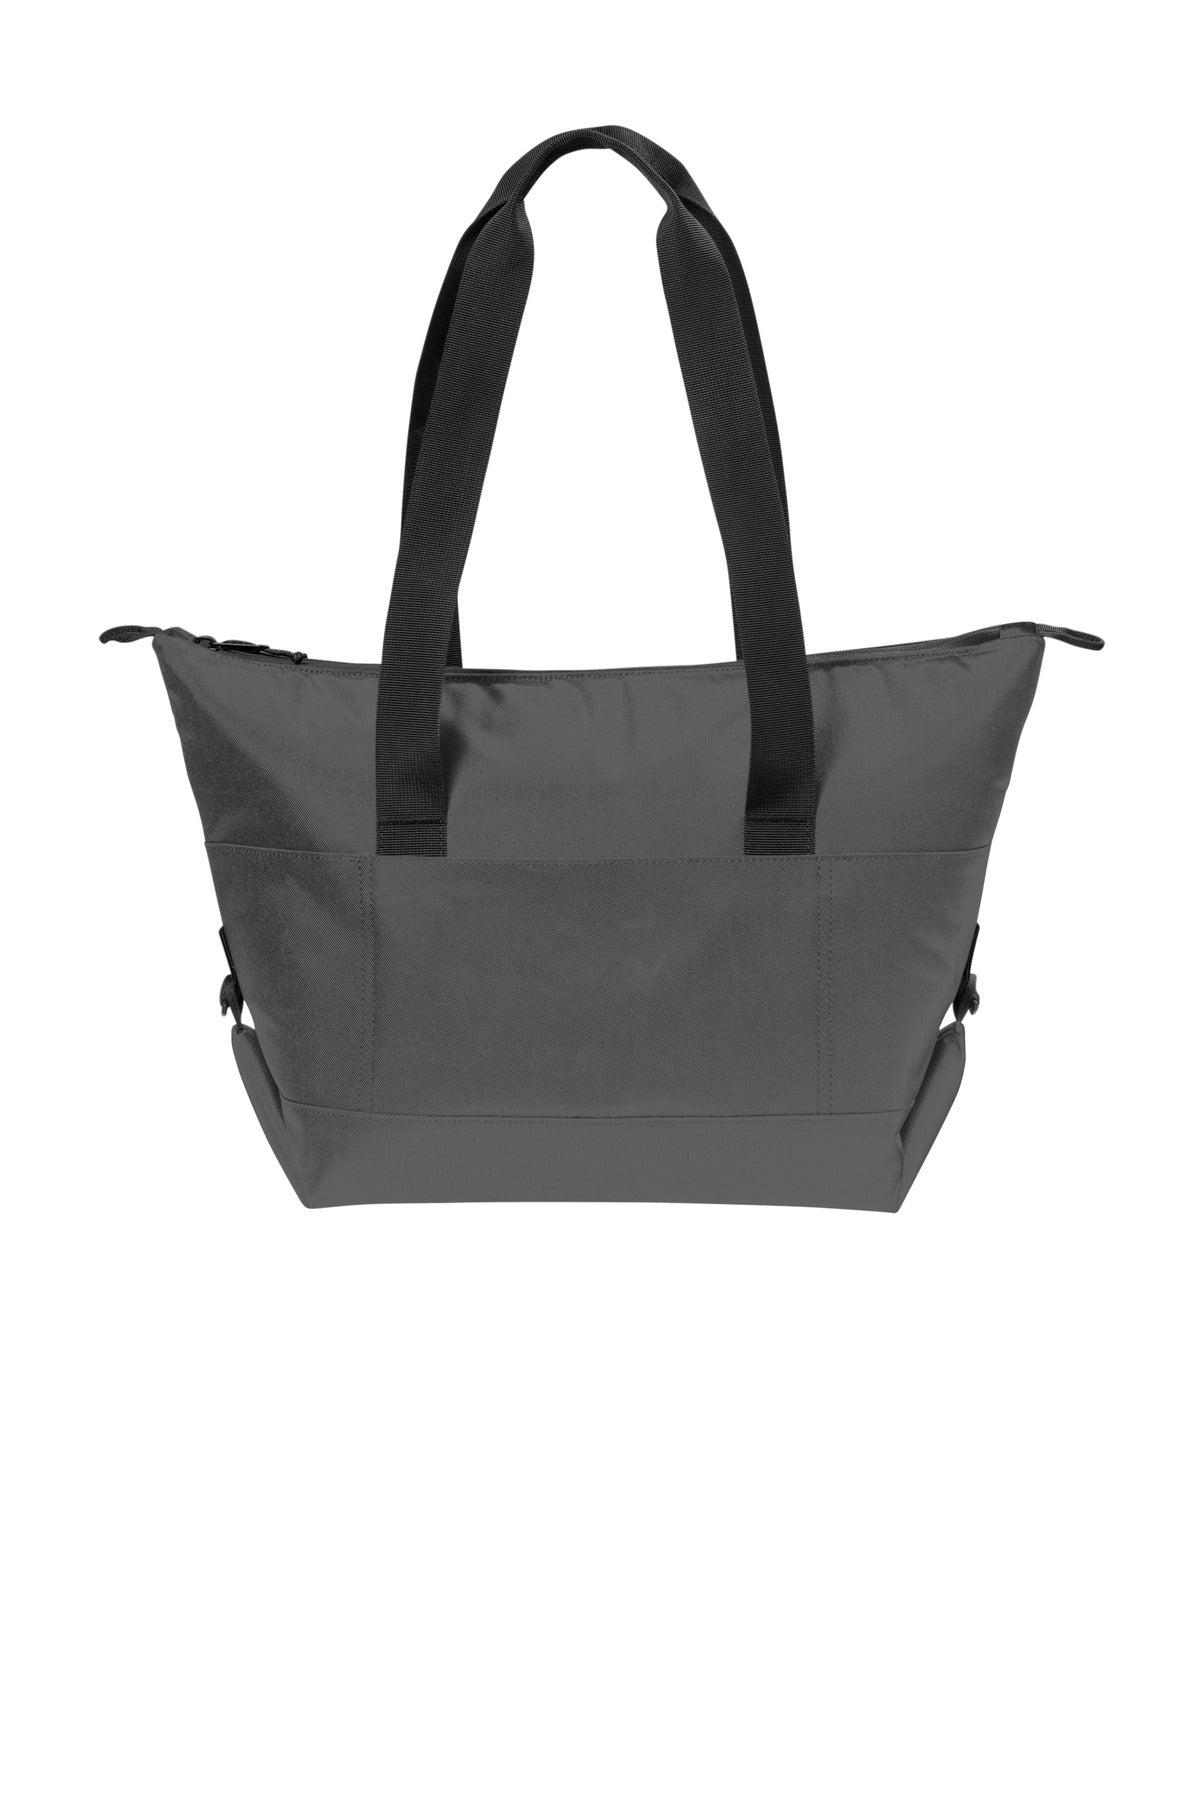 Photo of Port Authority Bags BG516  color  Charcoal/ Dark Charcoal